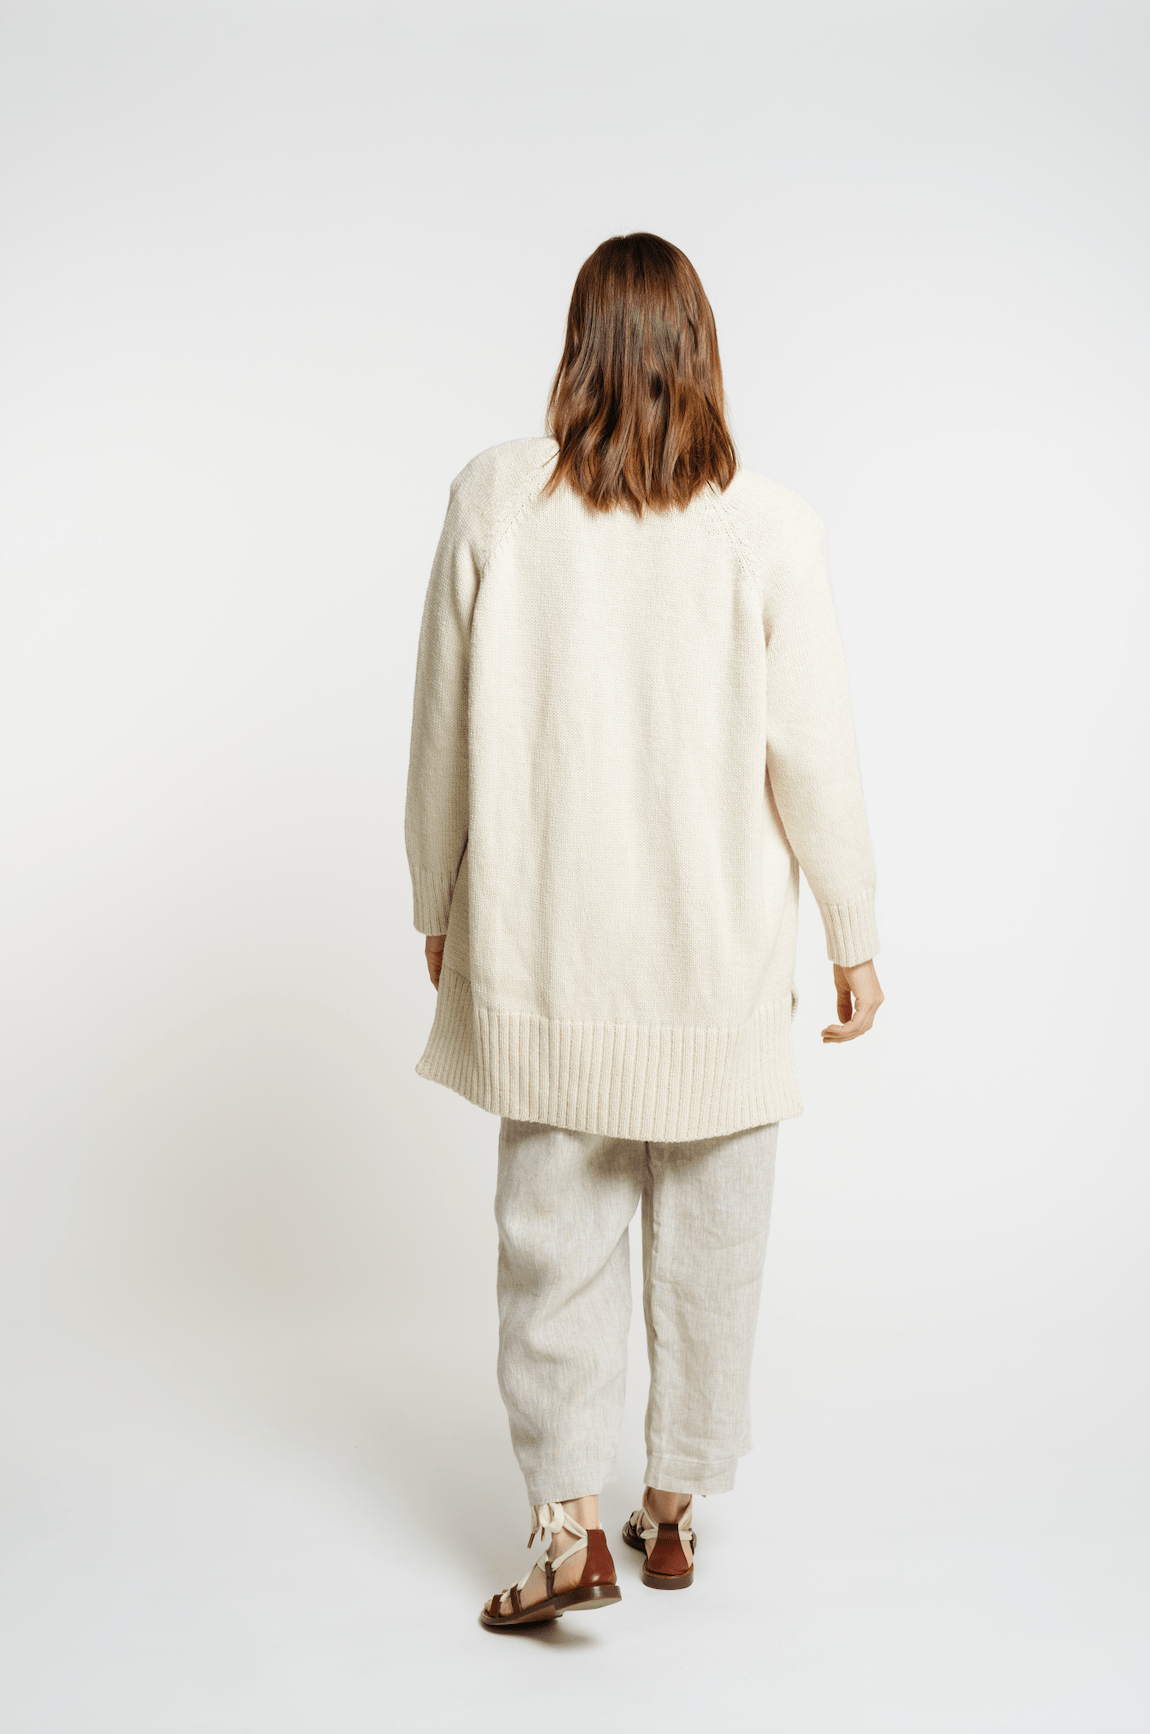 The back of a woman wearing a Valley Cardigan - Vanilla sweater and pants.